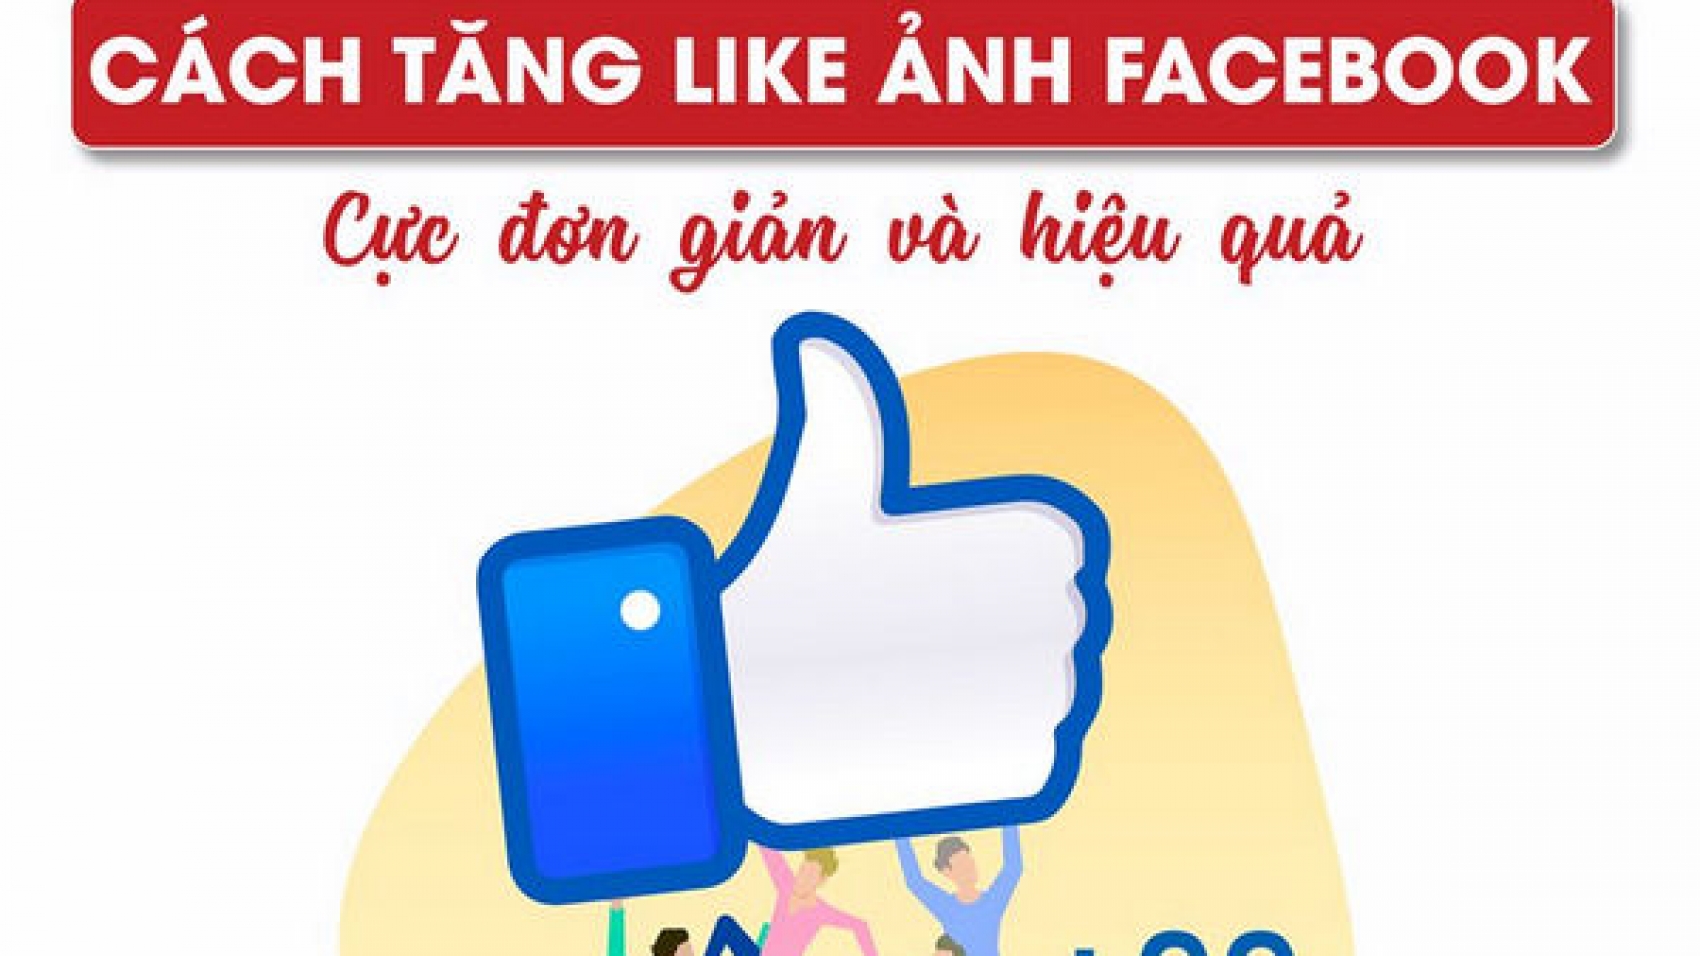 huong dan cach tang like comment facebook mien phi don gian nhat